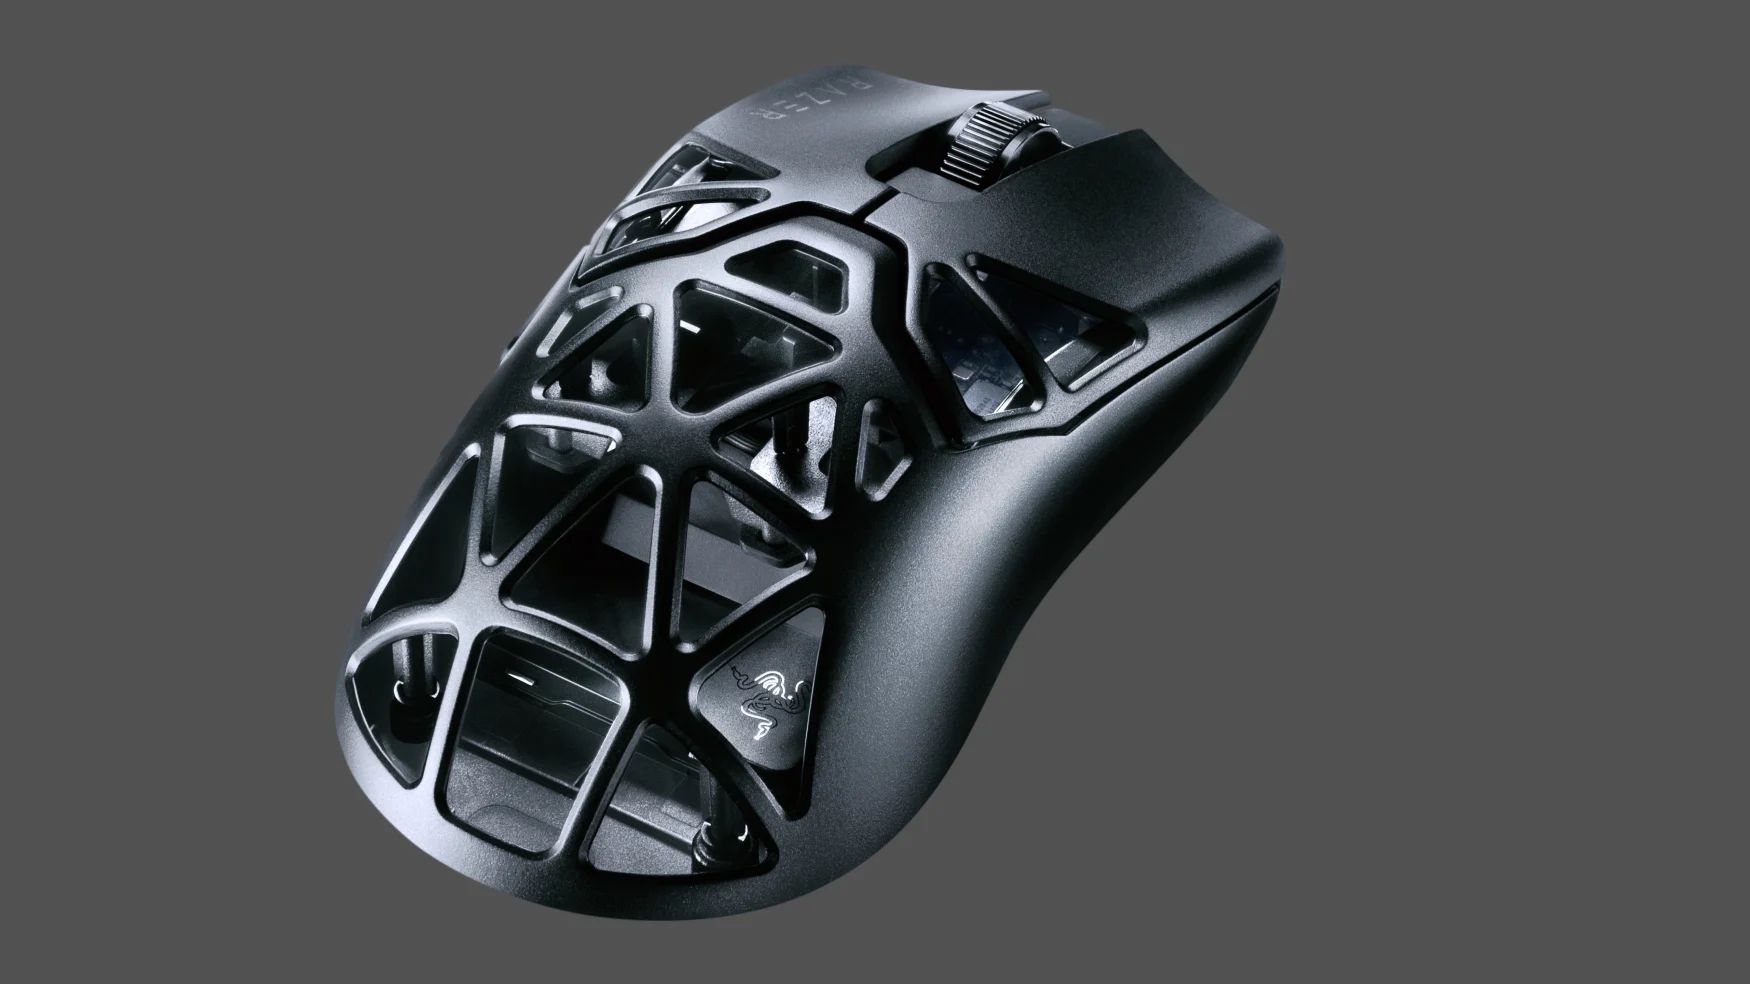 Marketing display of a new Razer gaming mouse with a magnesium exoskeleton and partially hollow interior.